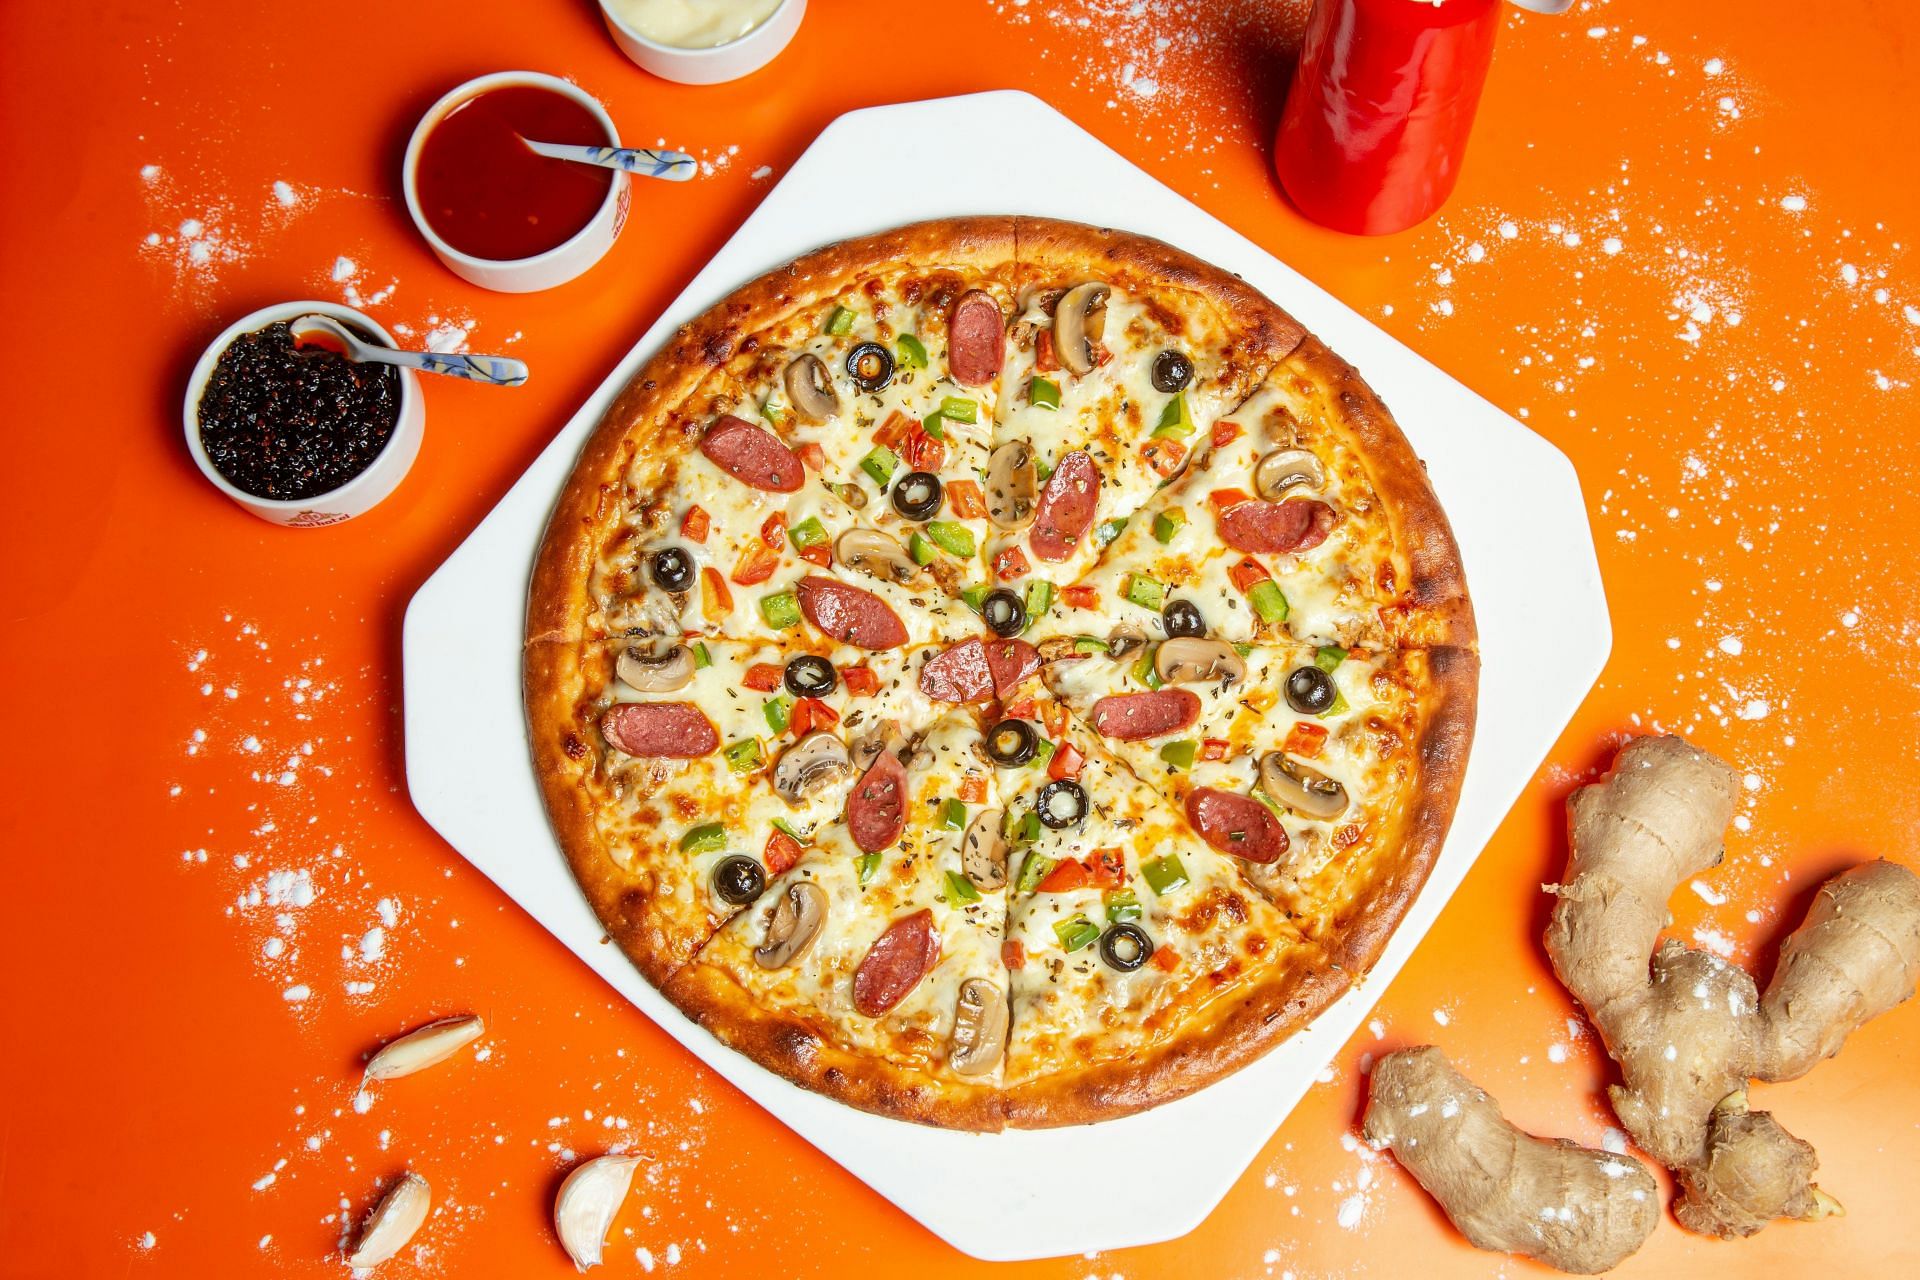 Pizza is among the most unhealthy foods in the world (Image by Shourav Sheikh/Unsplash)